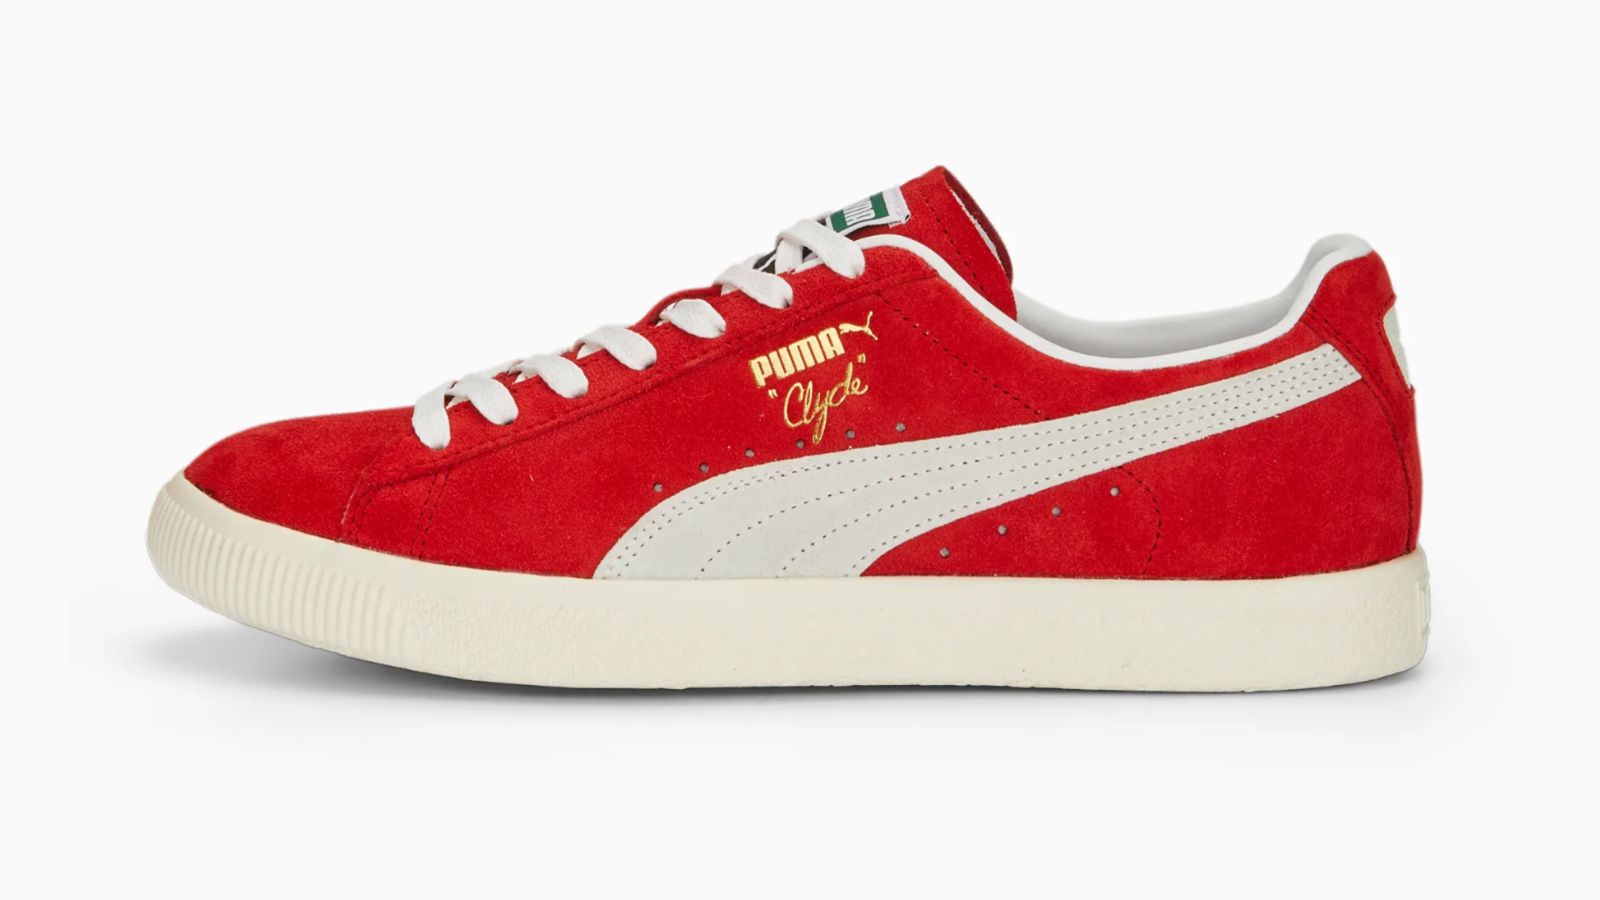 PUMA Clyde product image of a red low-top featuring an off-white midsole and side detail and gold PUMA Clyde branding.